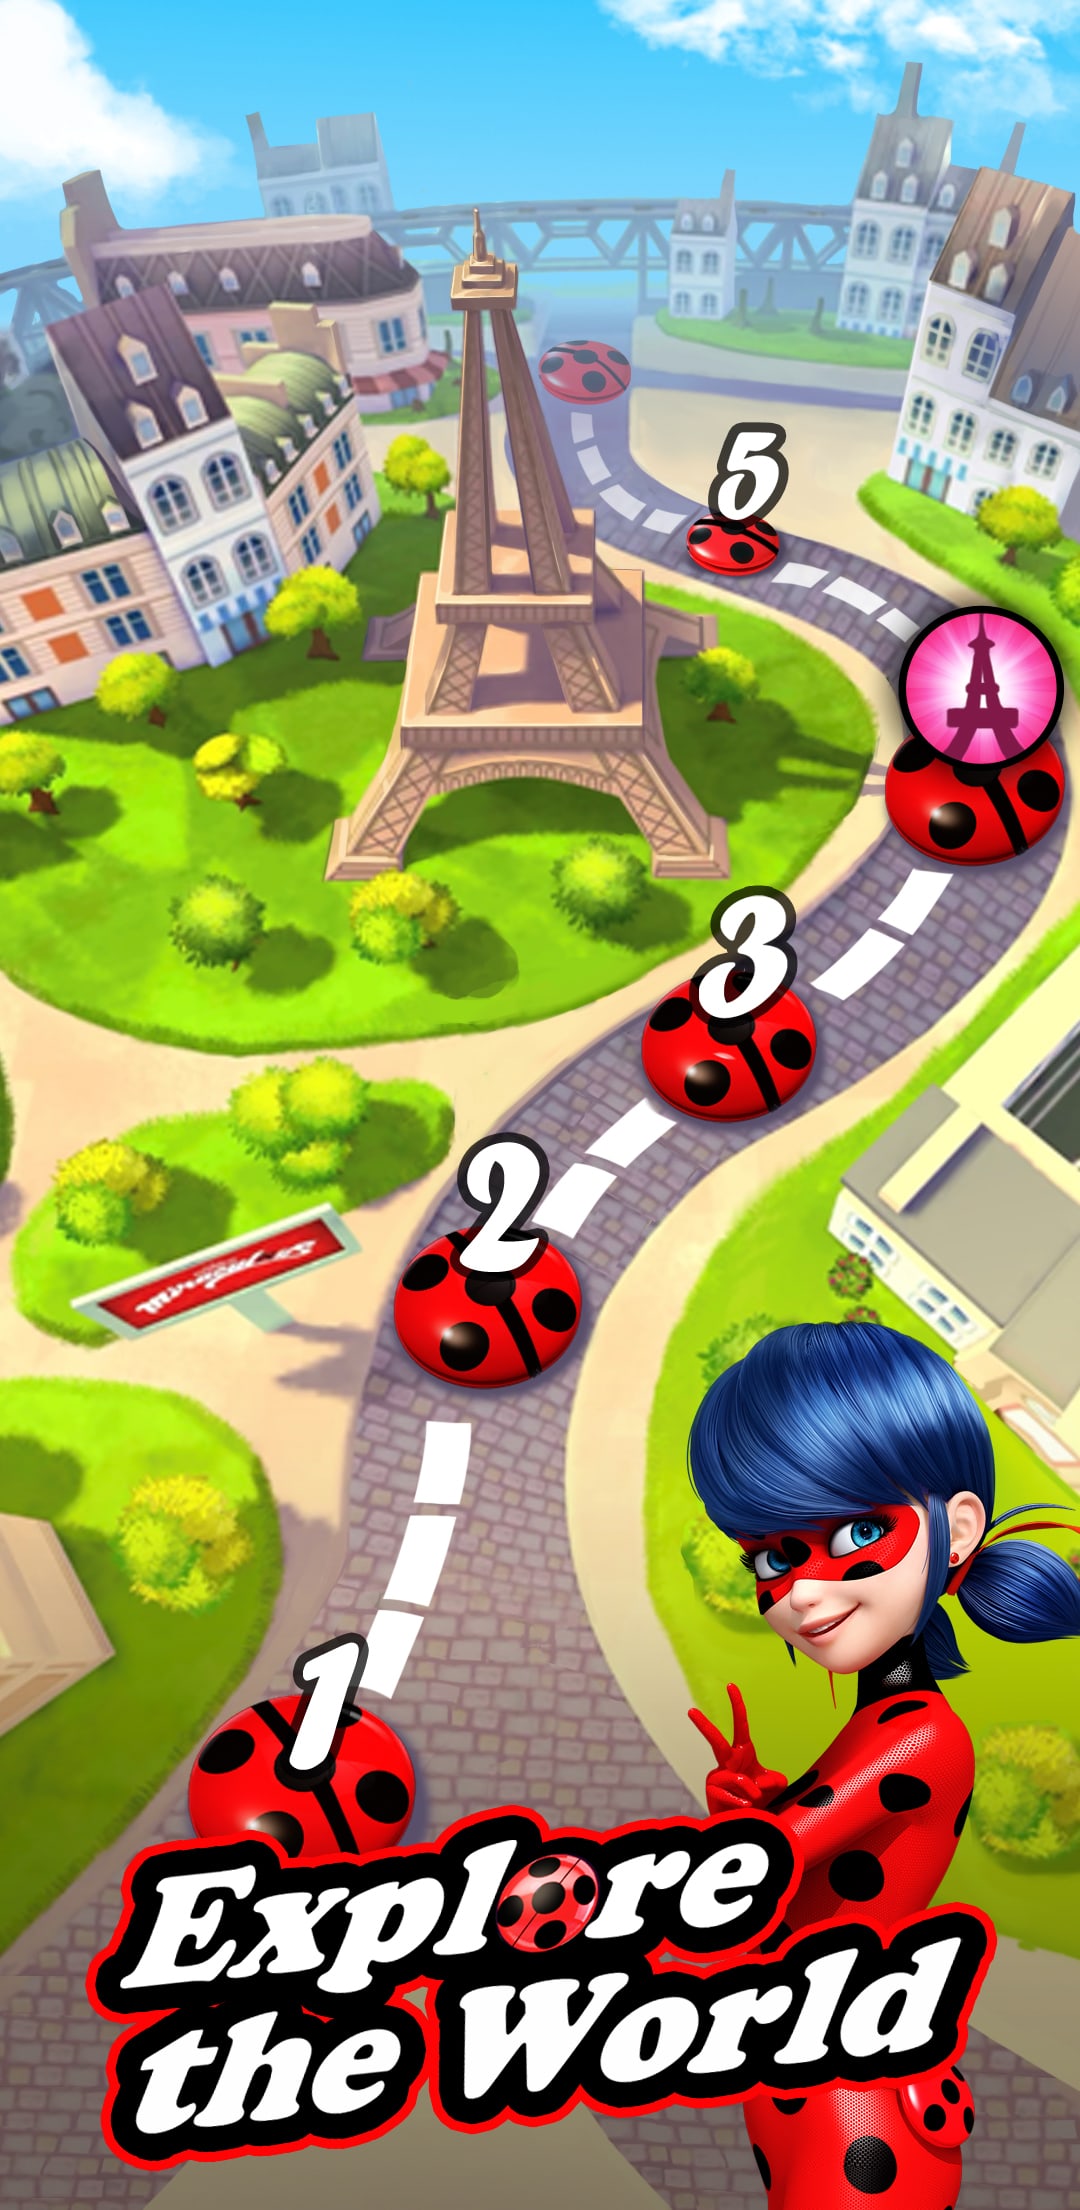 Mobile - Miraculous Ladybug & Cat Noir - The Official Game - Cat